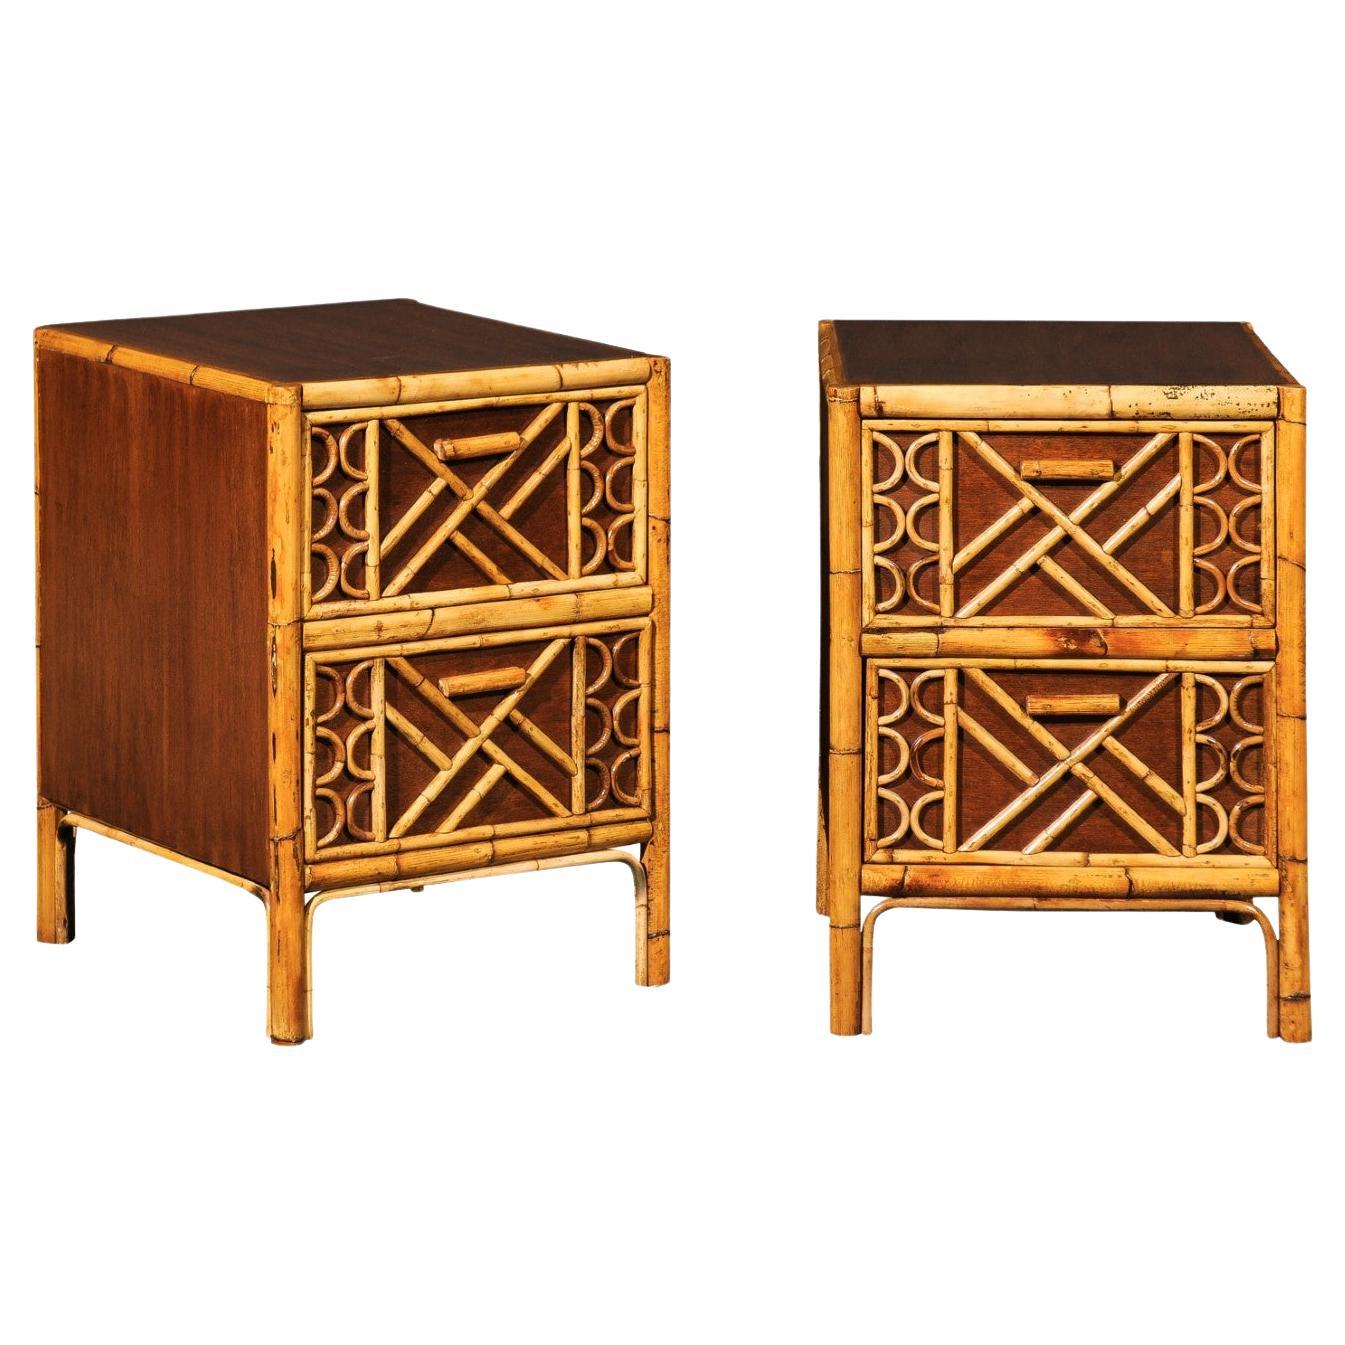 Magnificent Restored Mahogany and Rattan End Tables, Philippines, circa 1950 For Sale